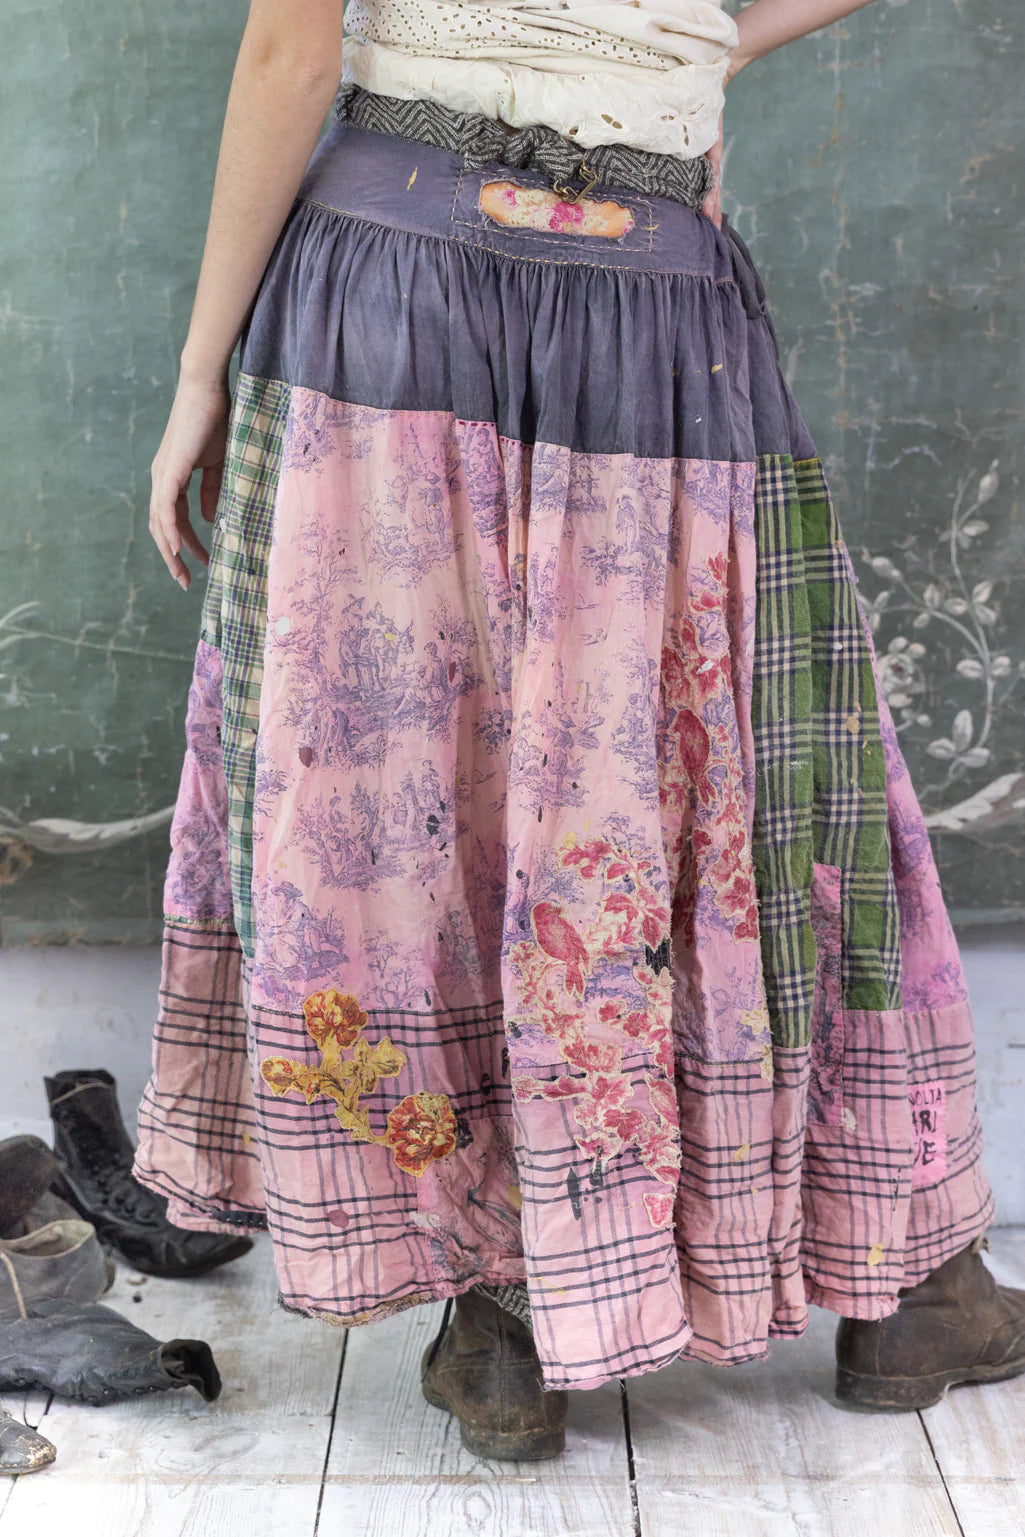 Patchwork Friendship Skirt by Magnolia Pearl